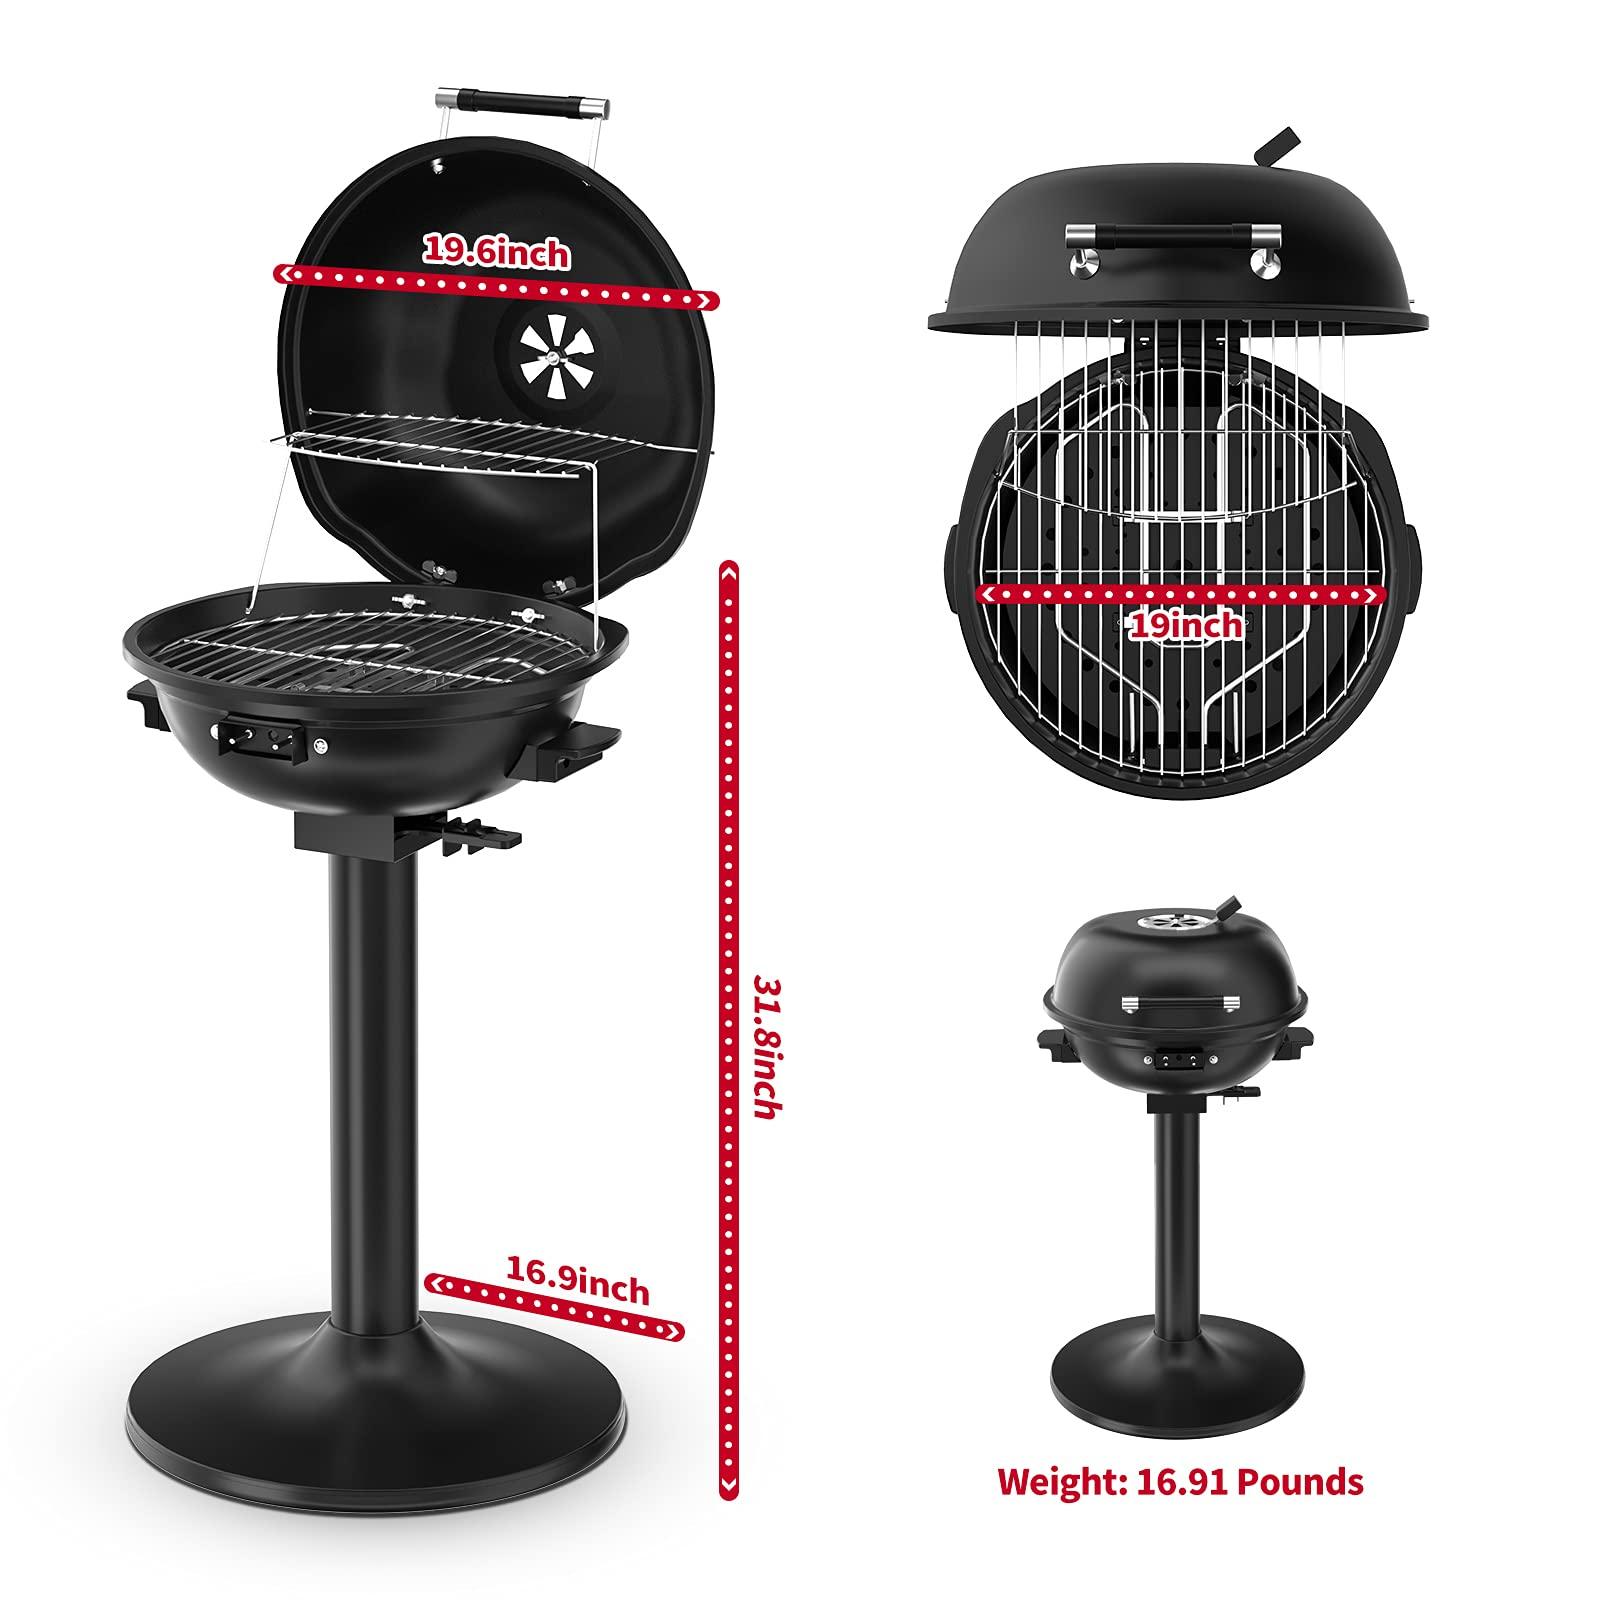 Vayepro Electric Grill Outdoor, Electric Barbecue Grill,15-Serving Nonstick Removable Stand Patio Grill,1800W Portable BBQ Grill for Cooking,Double Layer Design - CookCave